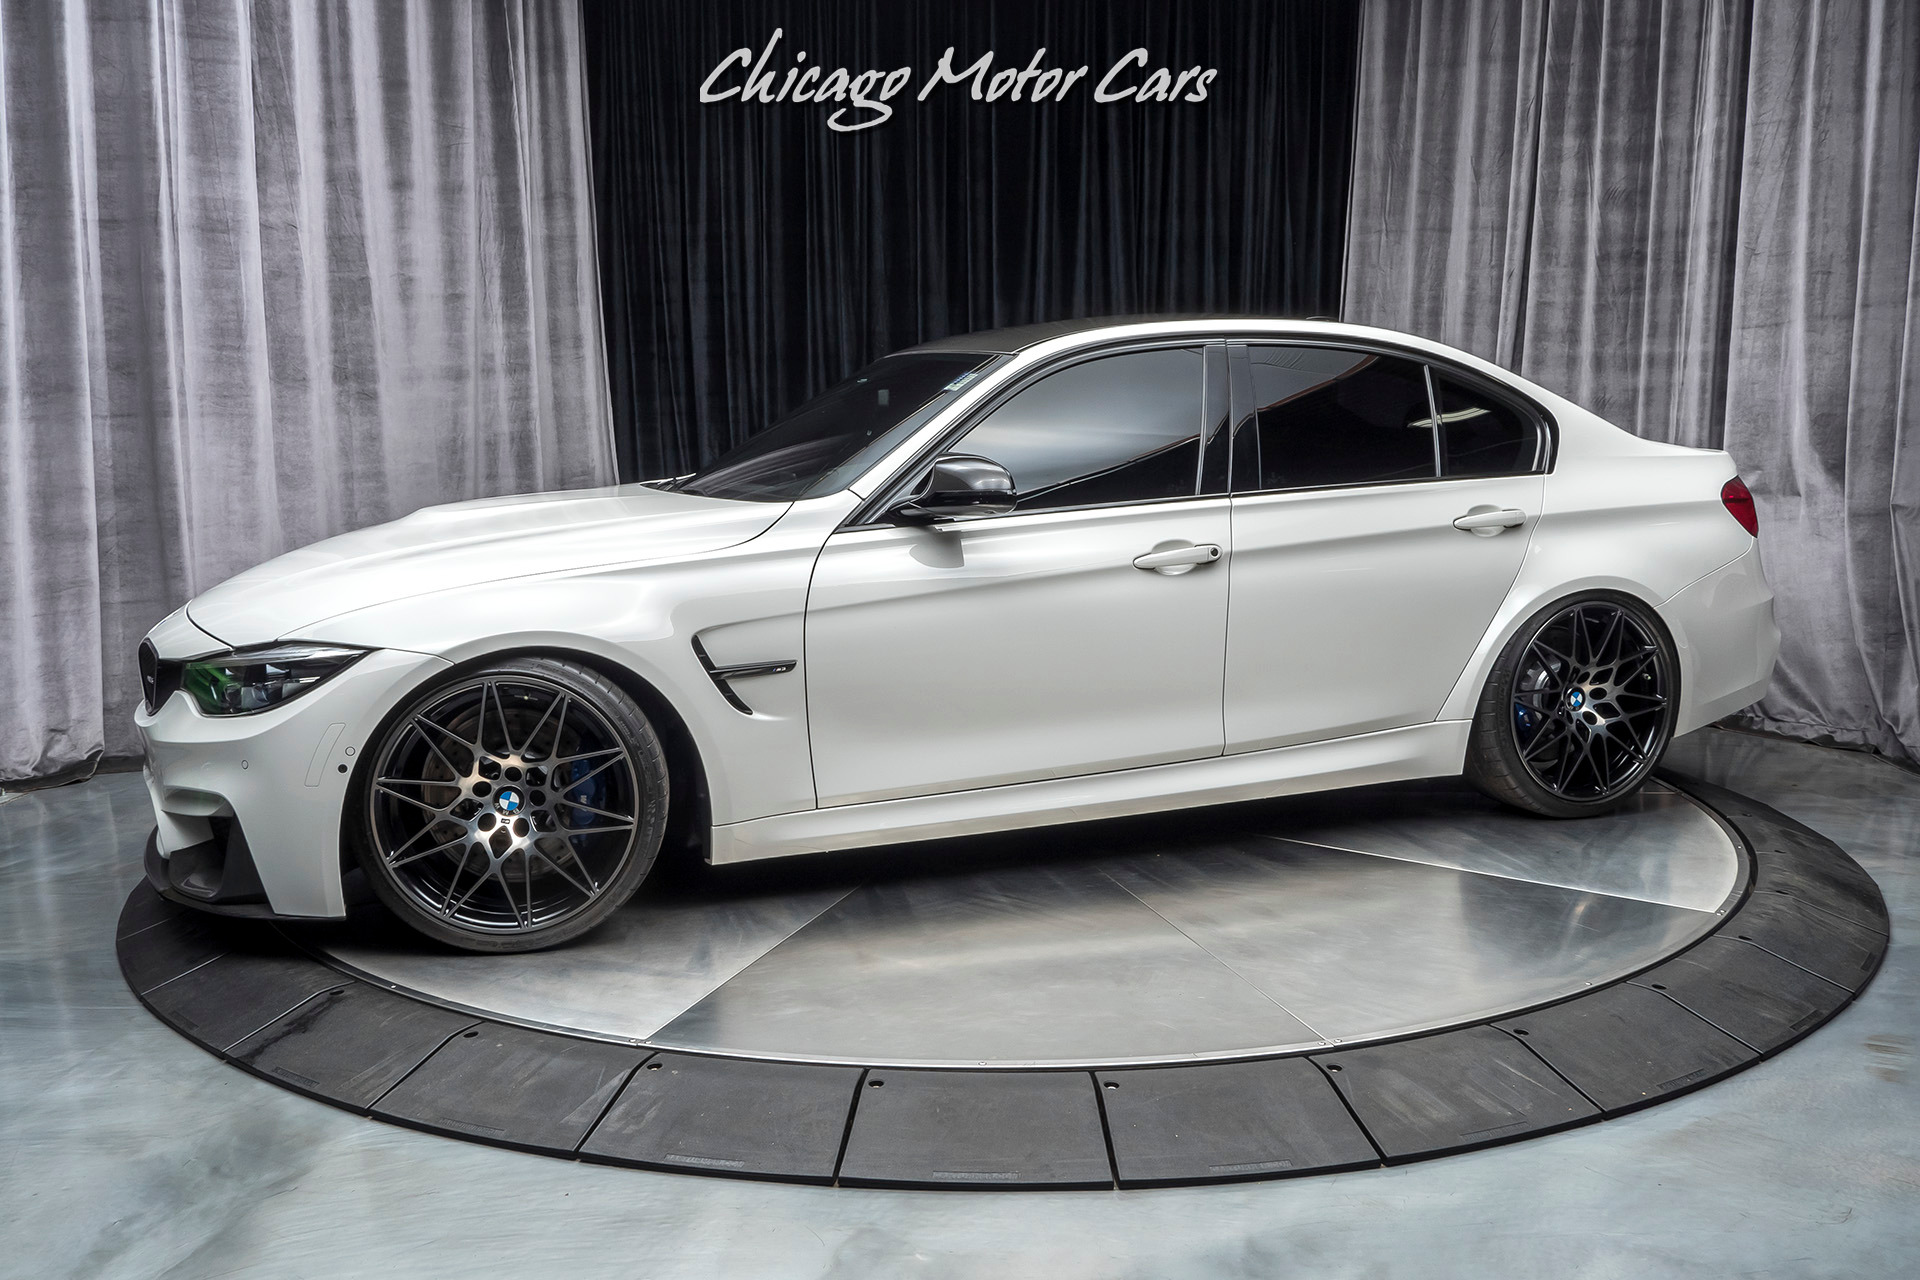 Used 2018 Bmw M3 Competition Sedan Msrp 82k Upgrades Loaded Carbon Fiber For Sale Special Pricing Chicago Motor Cars Stock 16565